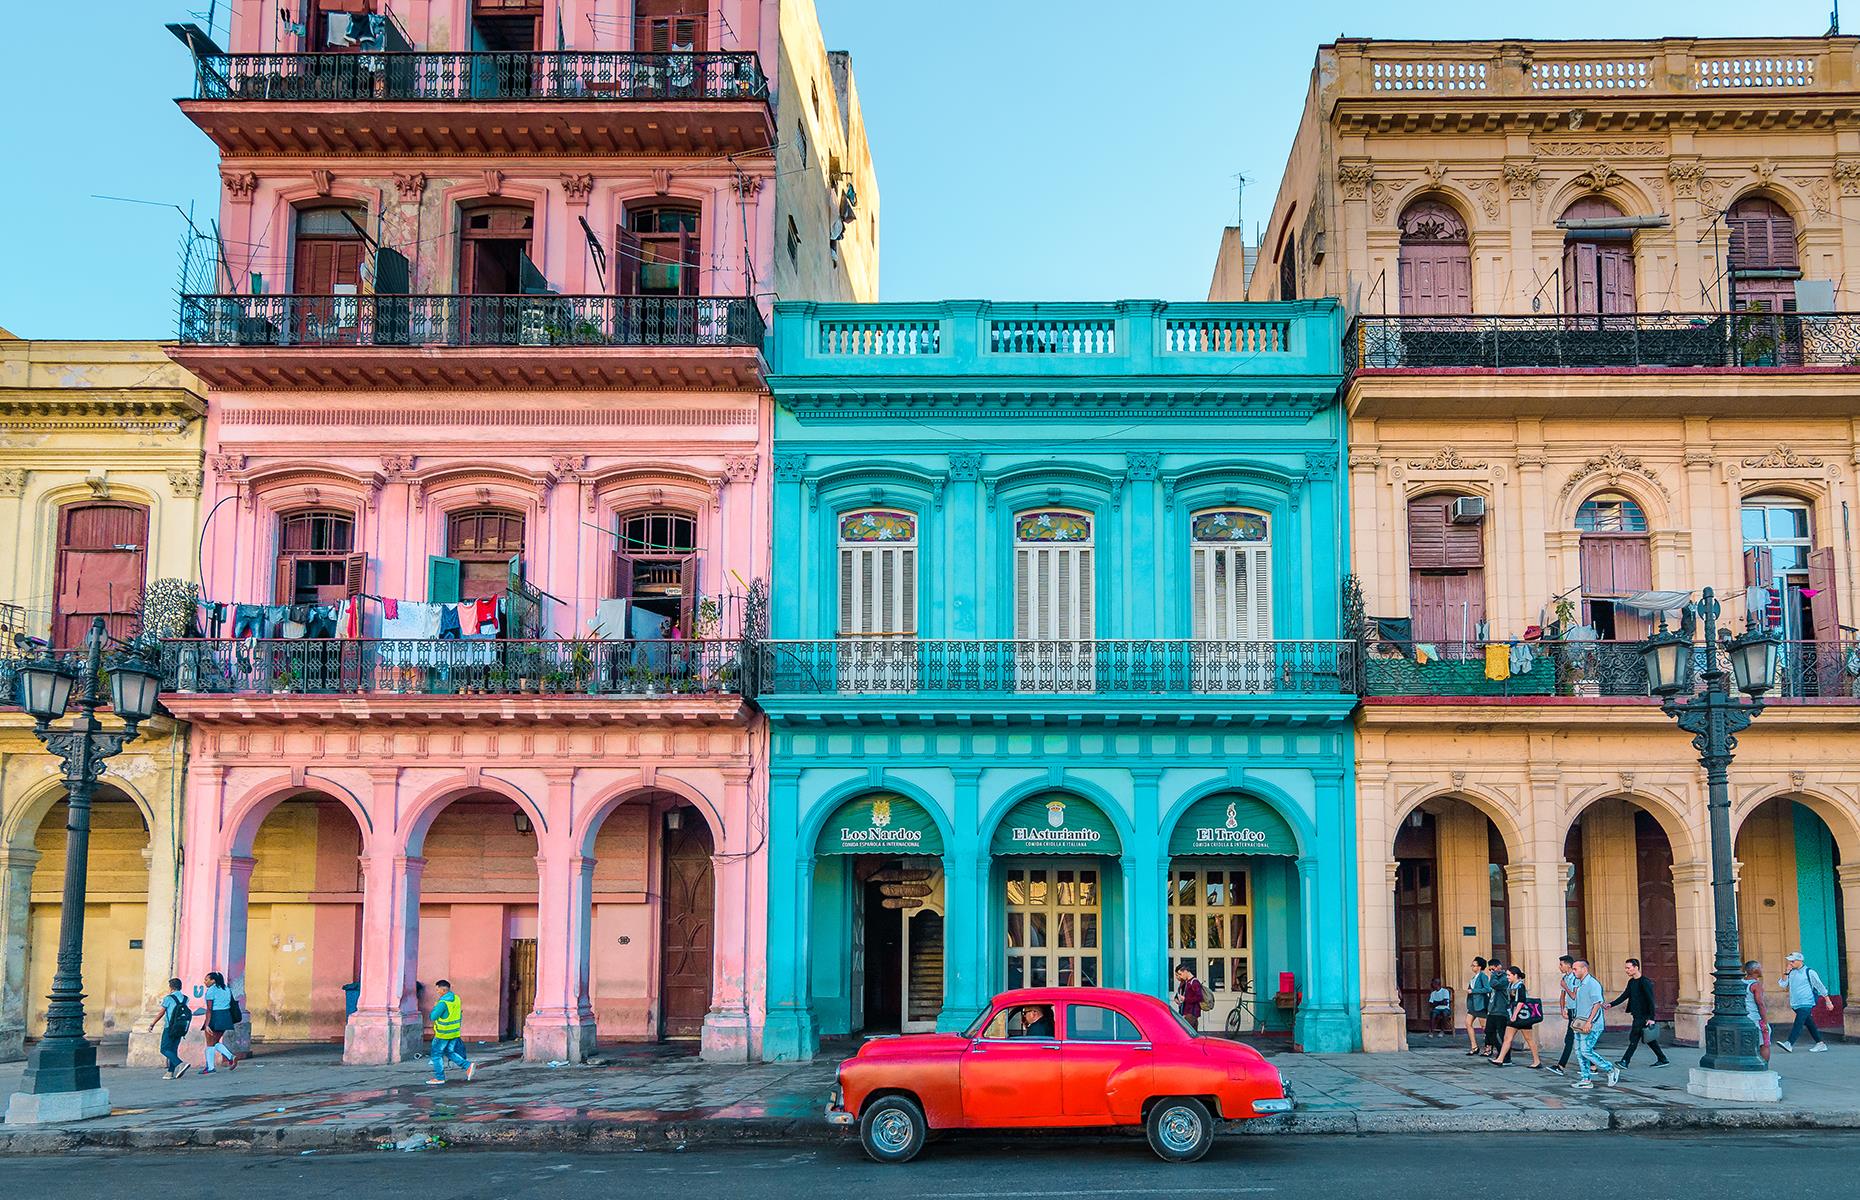 Salsa is synonymous with Cuba. Once the sun sets in Havana, hit one of the many salsa clubs in the capital to dance the night away to local music. Or, if you're unsure of your moves, take a salsa class at one of the many schools.